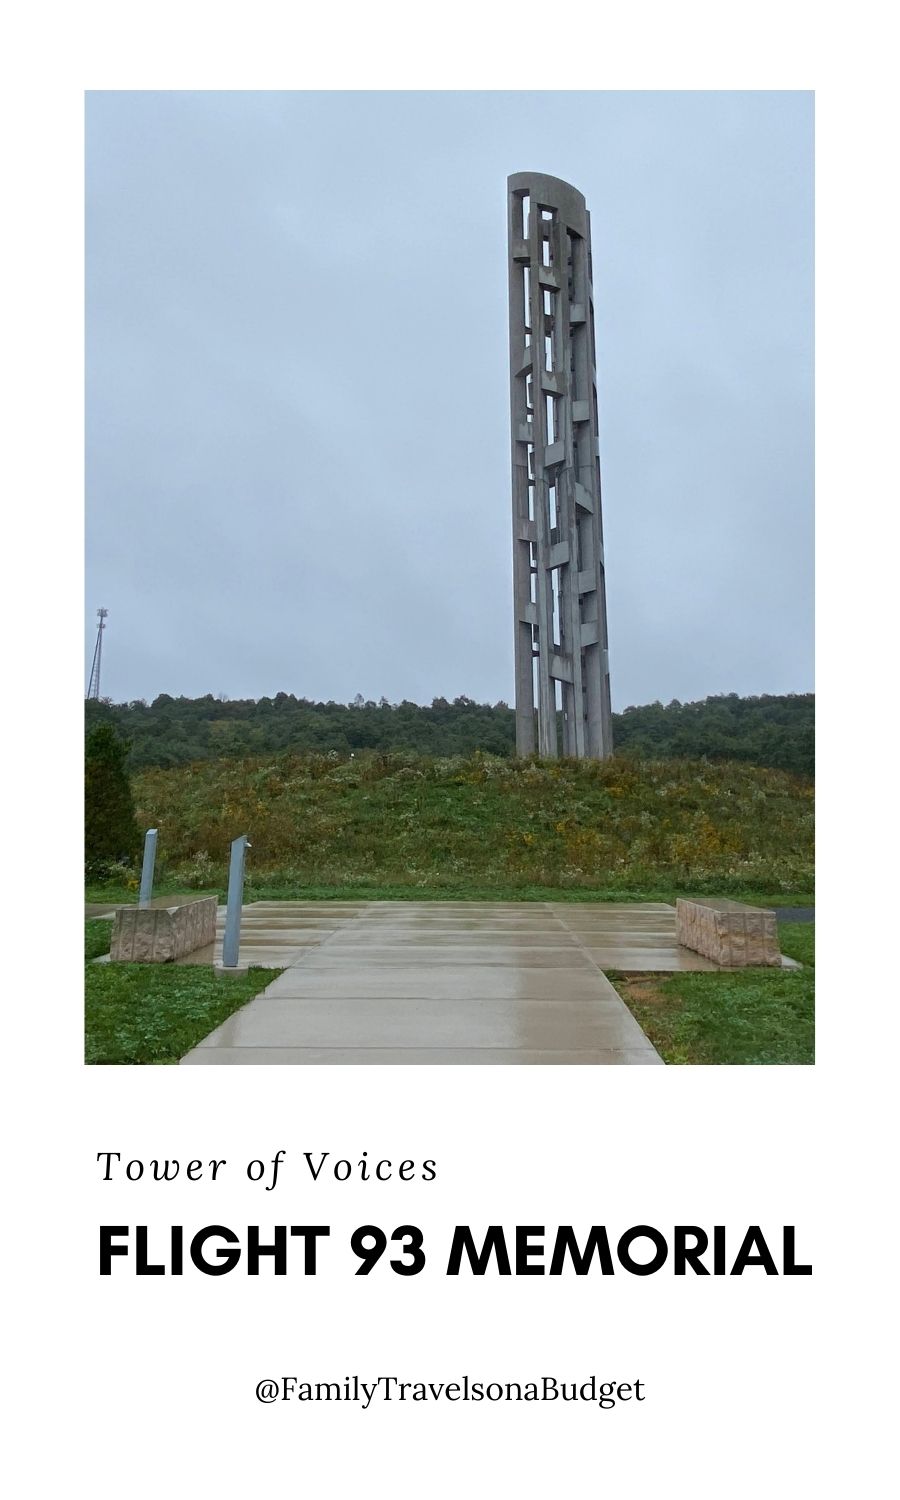 The Flight 93 National Memorial in the Pennsylvania Laurel Highlands honors the memory of the passengers and crew who died on 9/11. The Tower of Voices honors each of them. Other sites at this 2,200 acre park include the Visitor Center and the Wall of Names. This guide answers questions on what the memorial is, who should visit, park hours, and special tips for families visiting with children or pets. via @karendawkins